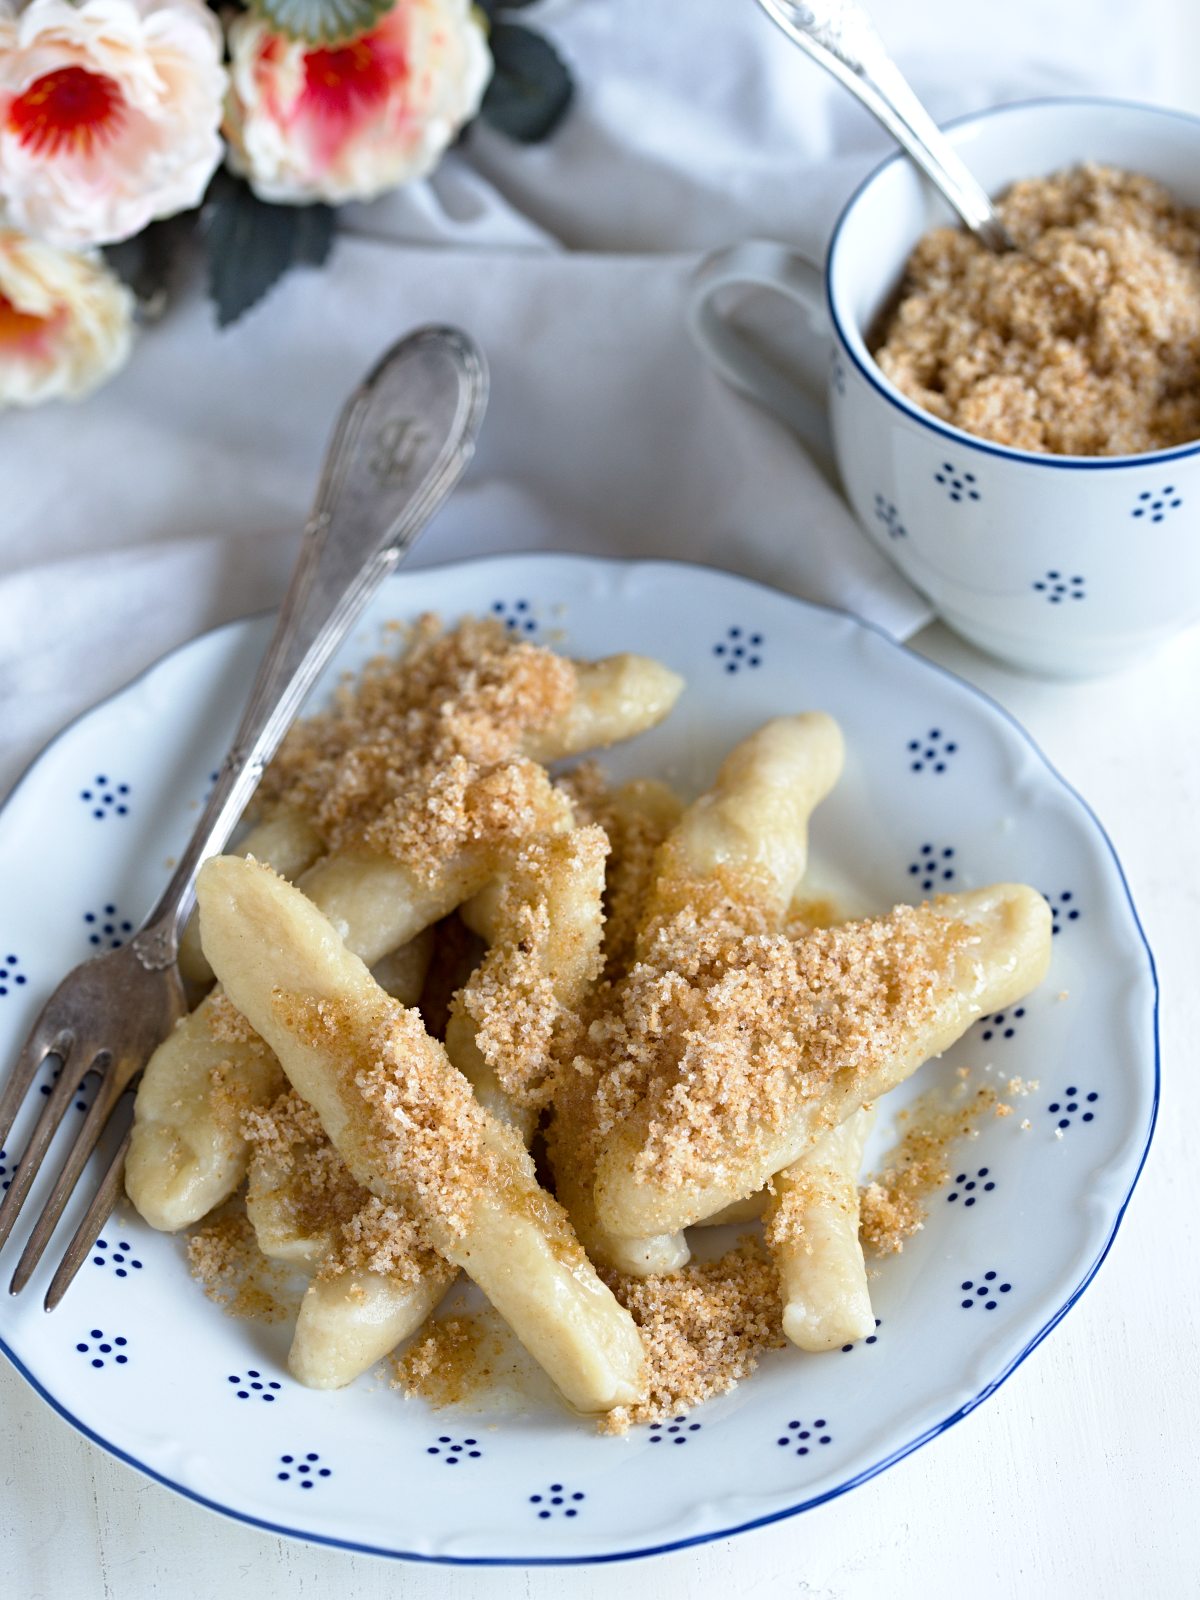 Czech sisky with fried breadcrumbs served on a plate.